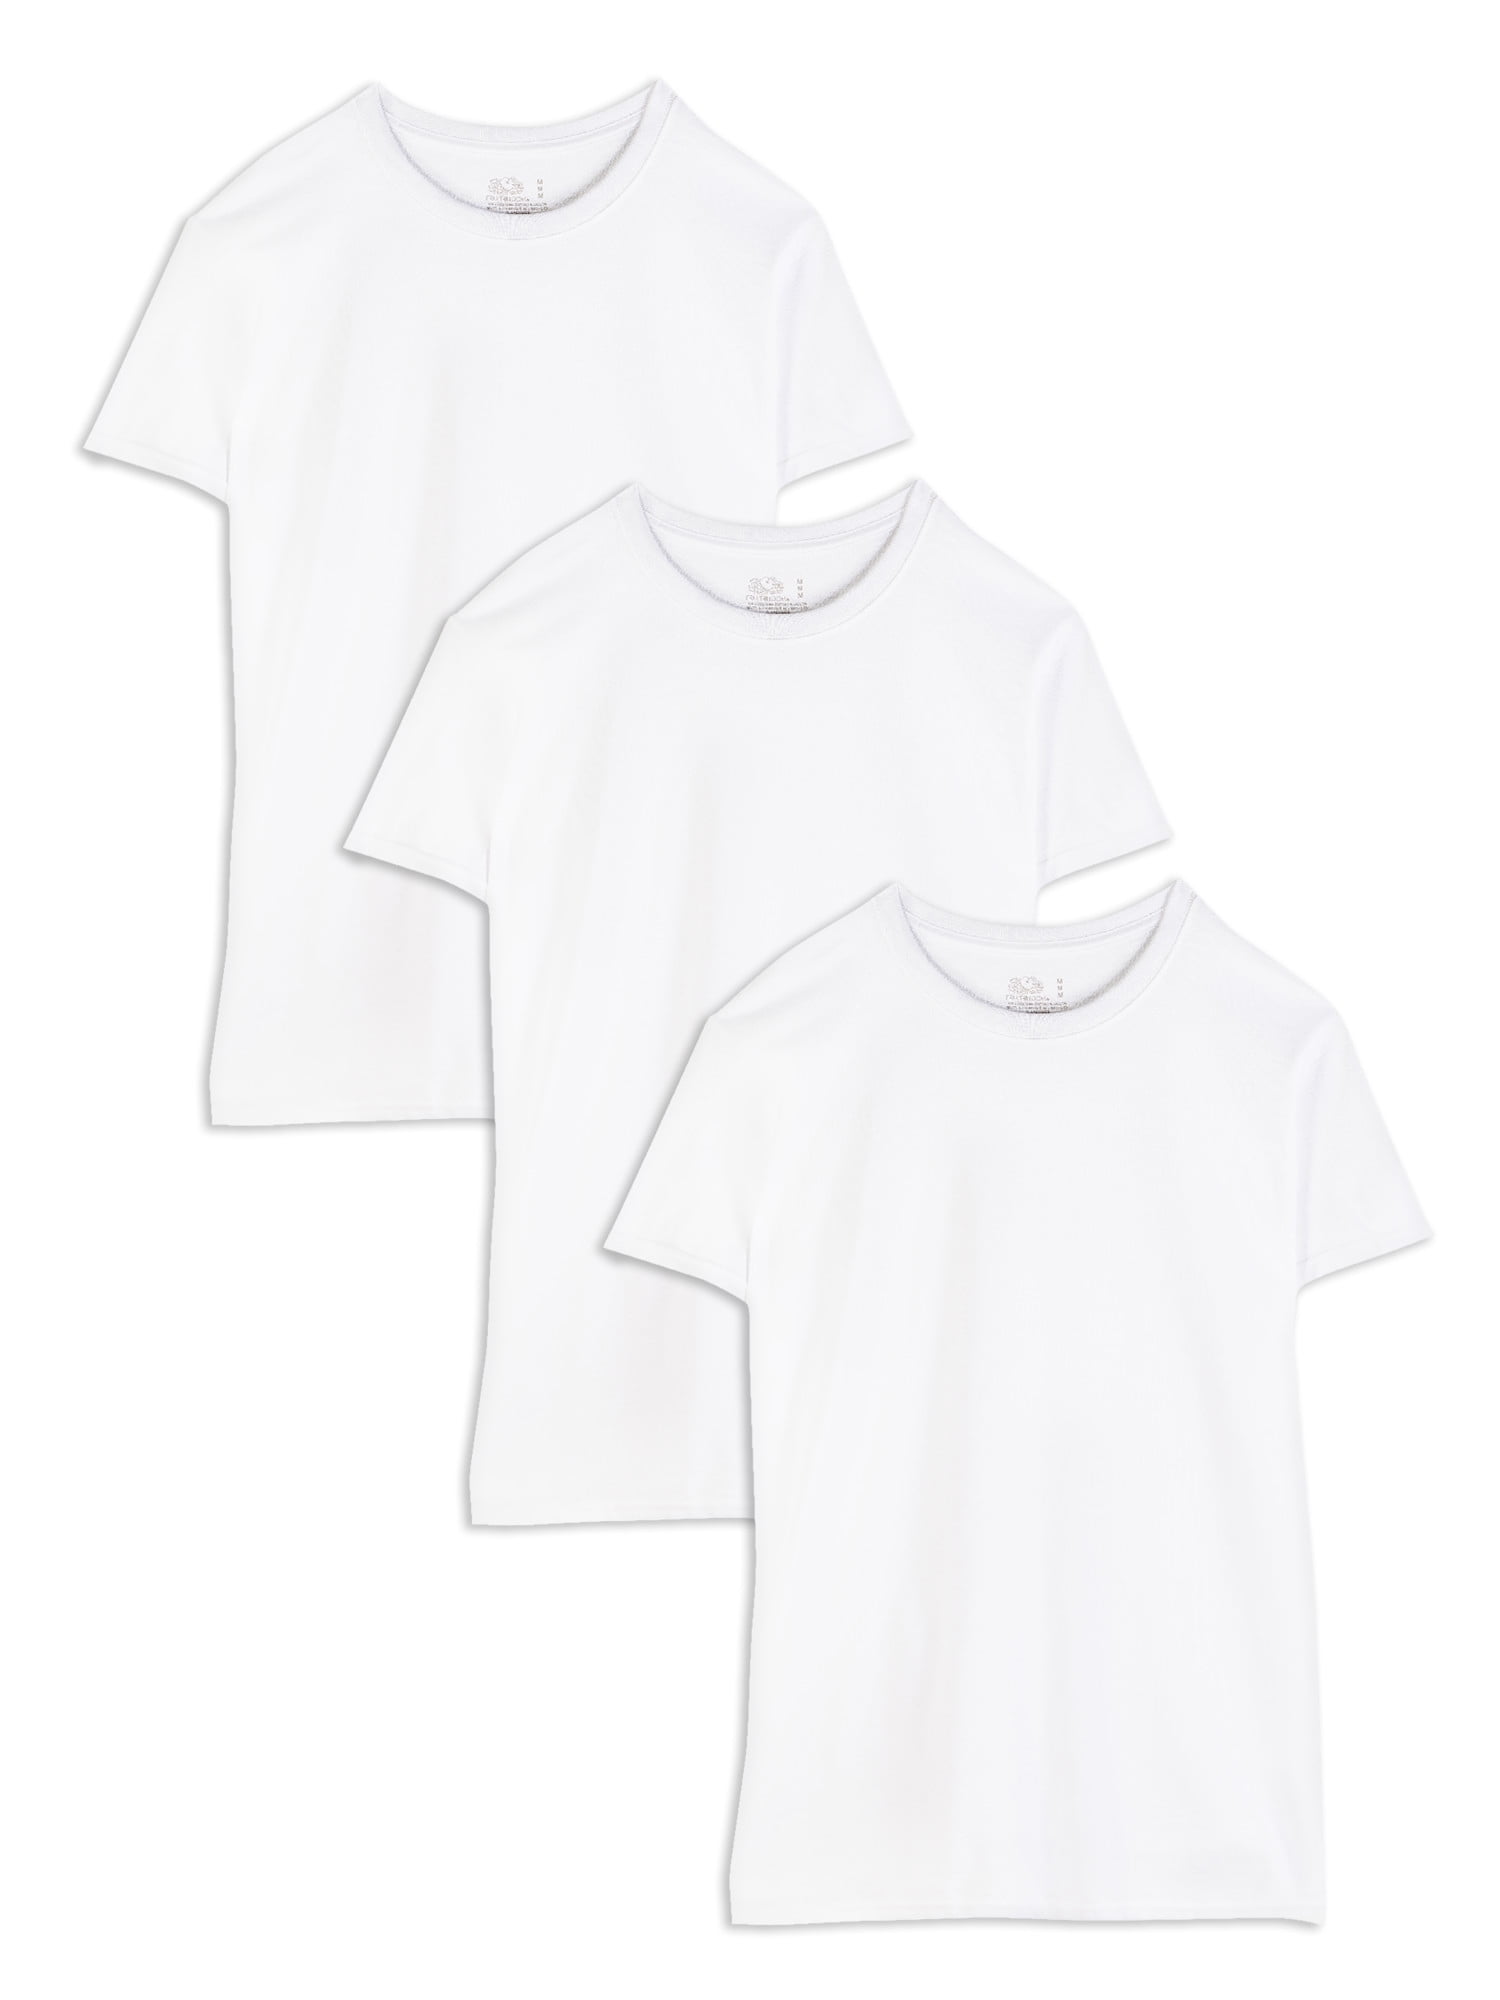 White Ice Fruit of the Loom Men's 3-Pack Breathable Crew T-Shirt Big Sizes, 